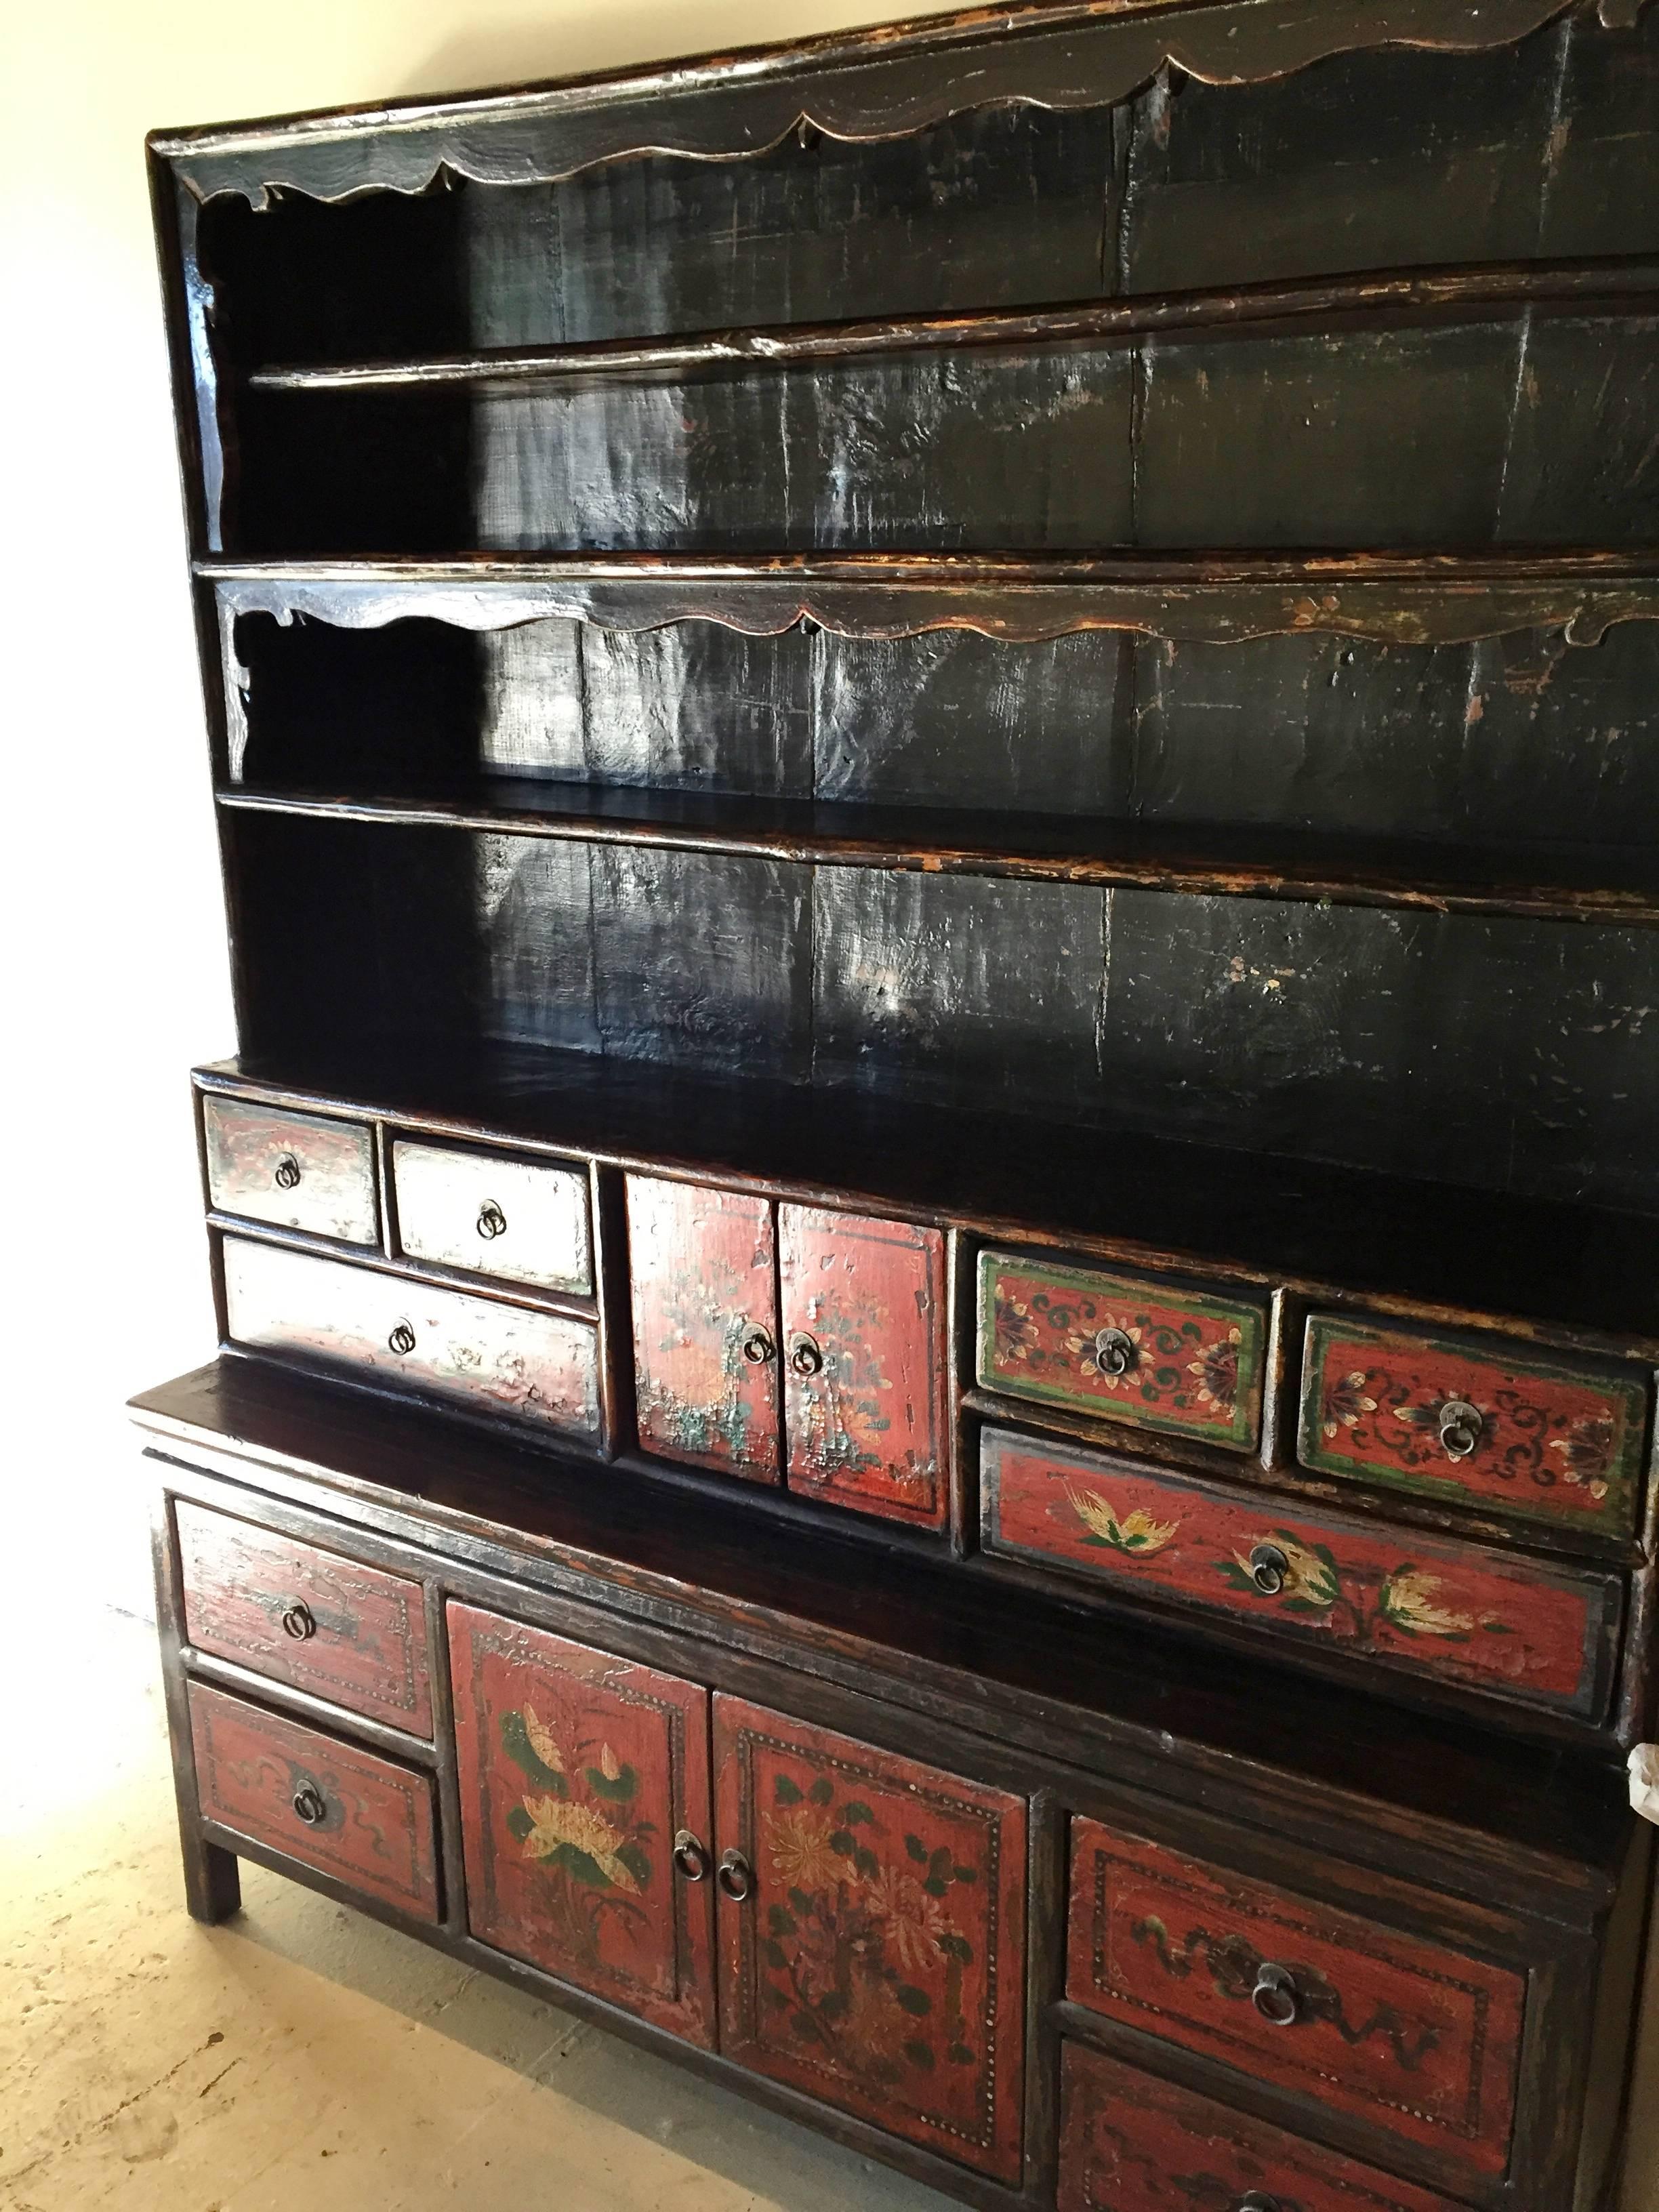 Rare 19th century Tibetan cupboard has multiple tiers of display and storage. The top is of an open design with scrolled framework. The middle section features six drawers and one pair of doors, while the bottom section four larger drawers and